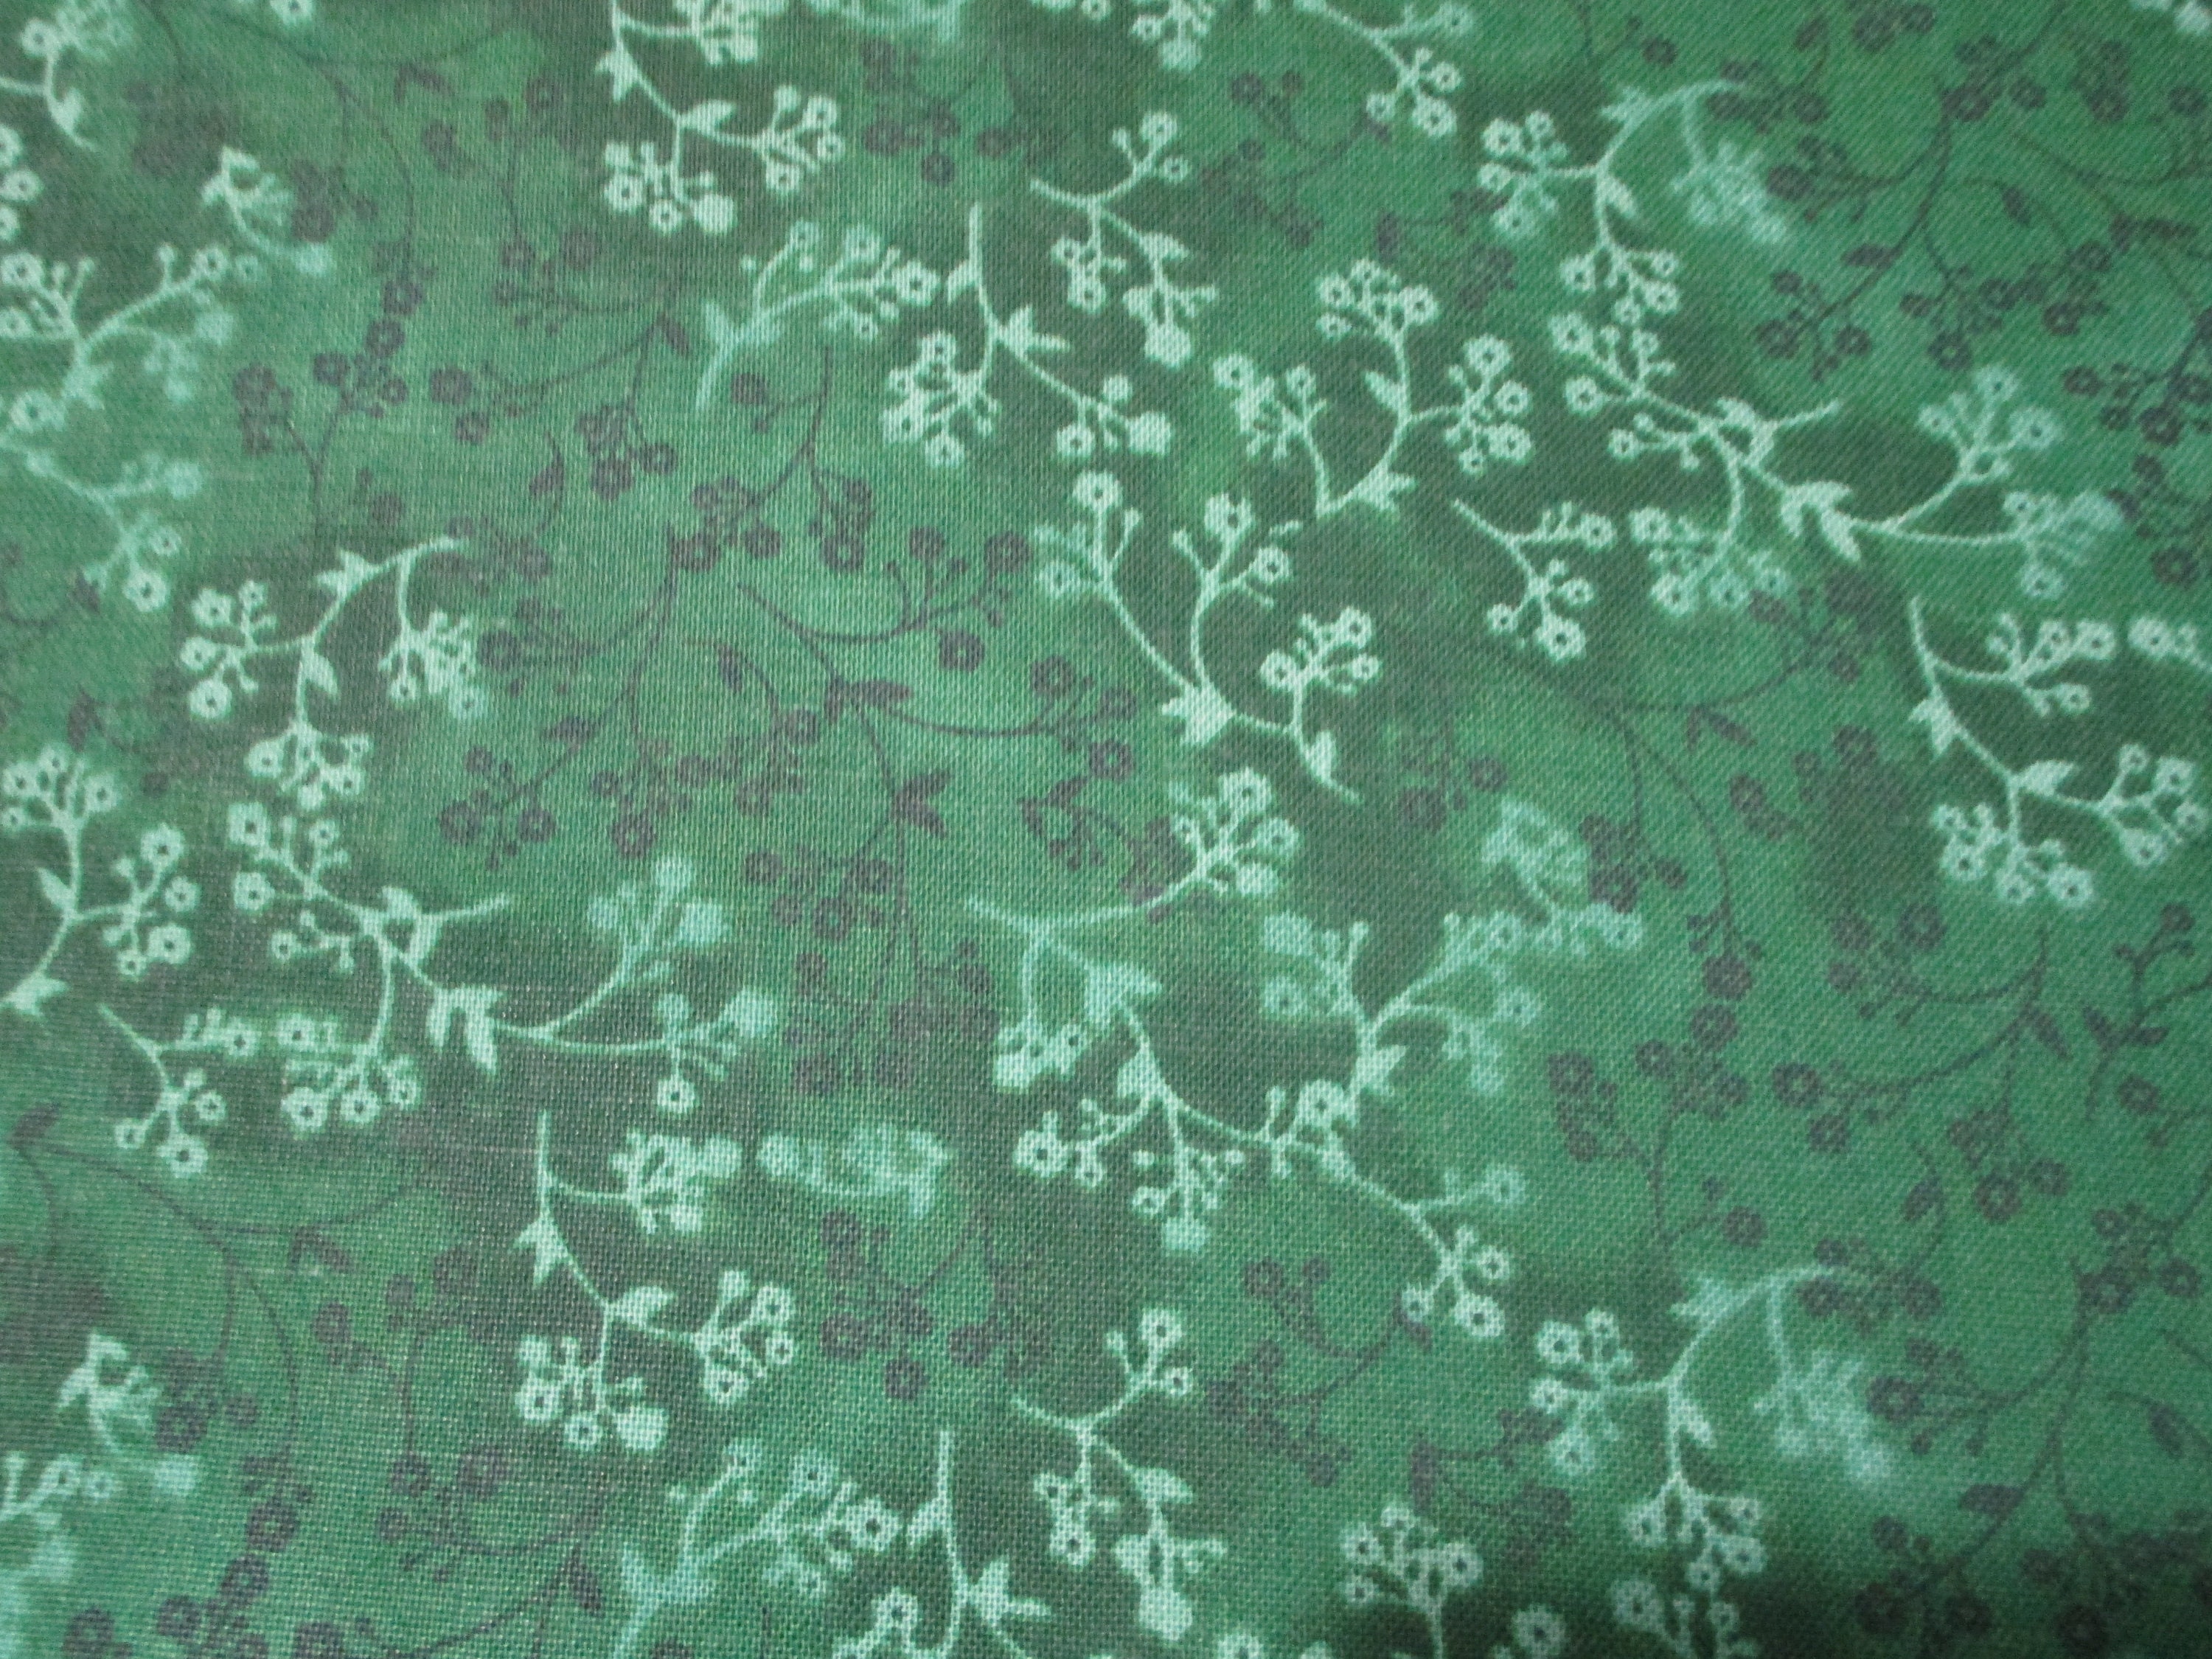 Quilt Cotton Fabric-razzle Dazzle Hunter Green Fabric Floral | Etsy